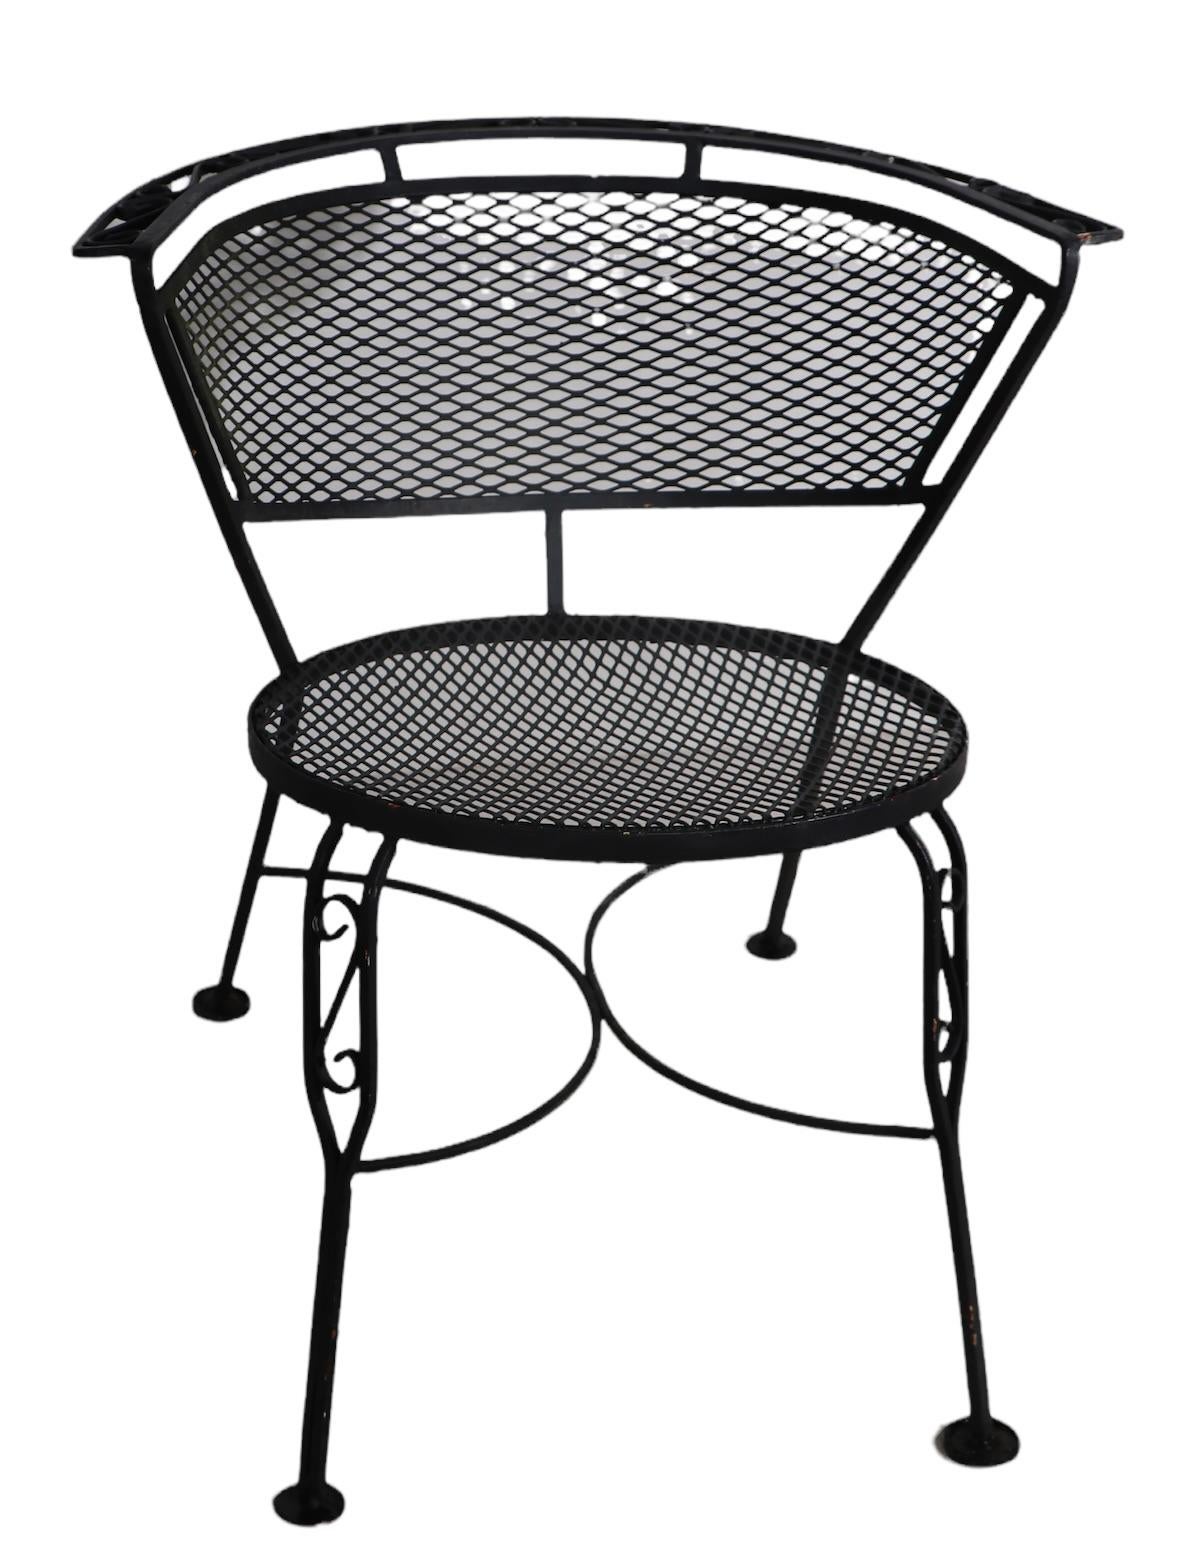 Pr. Decorative Garden Patio Poolside Wrought Iron Chairs by Woodard For Sale 2